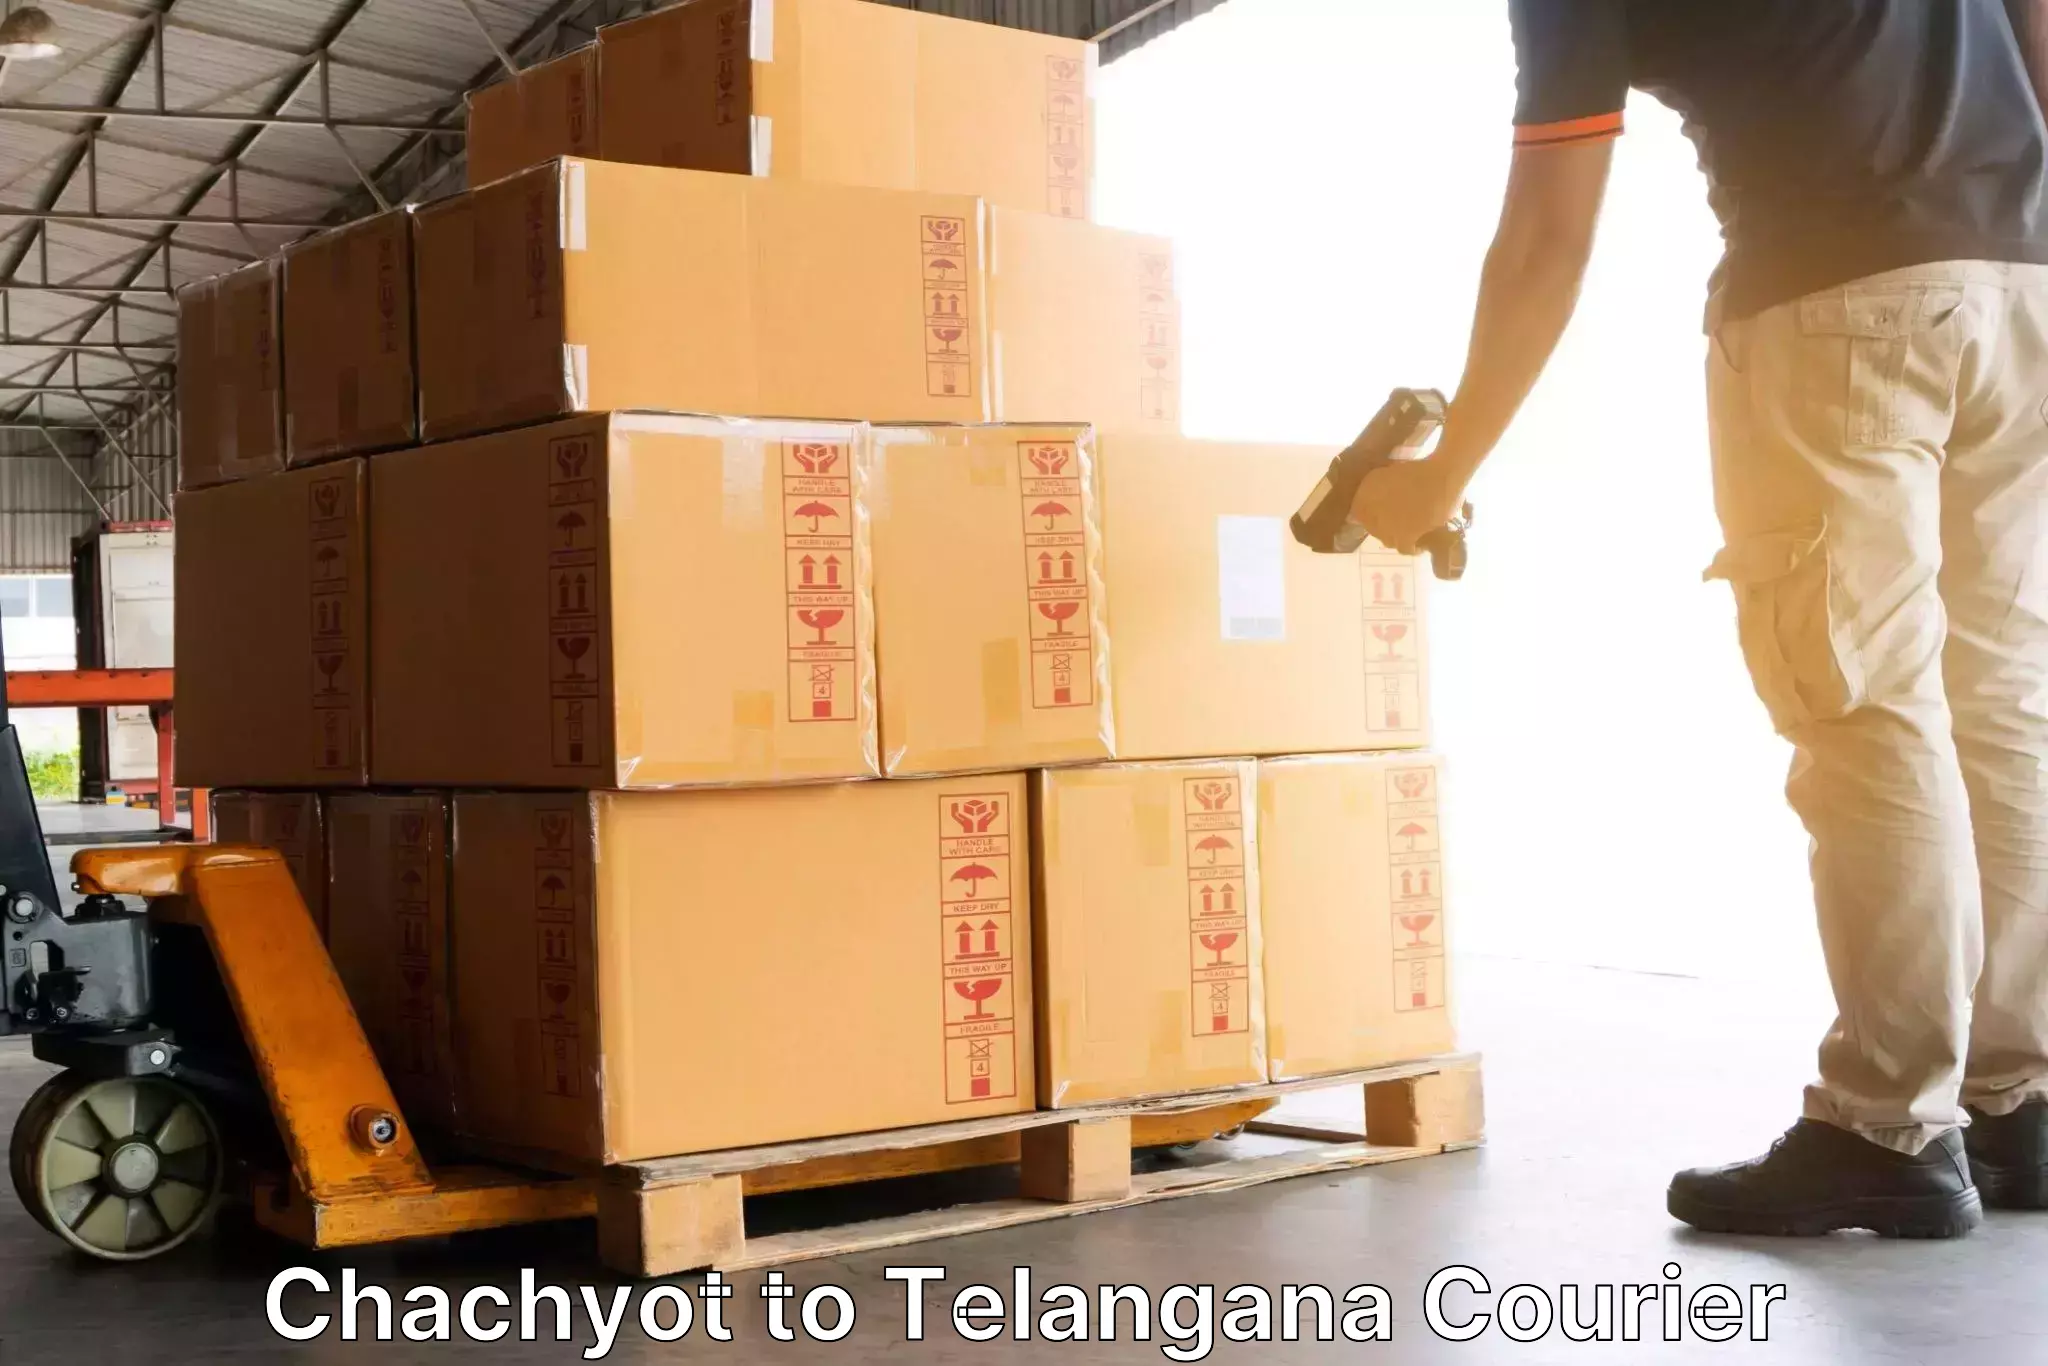 Courier rate comparison in Chachyot to Secunderabad